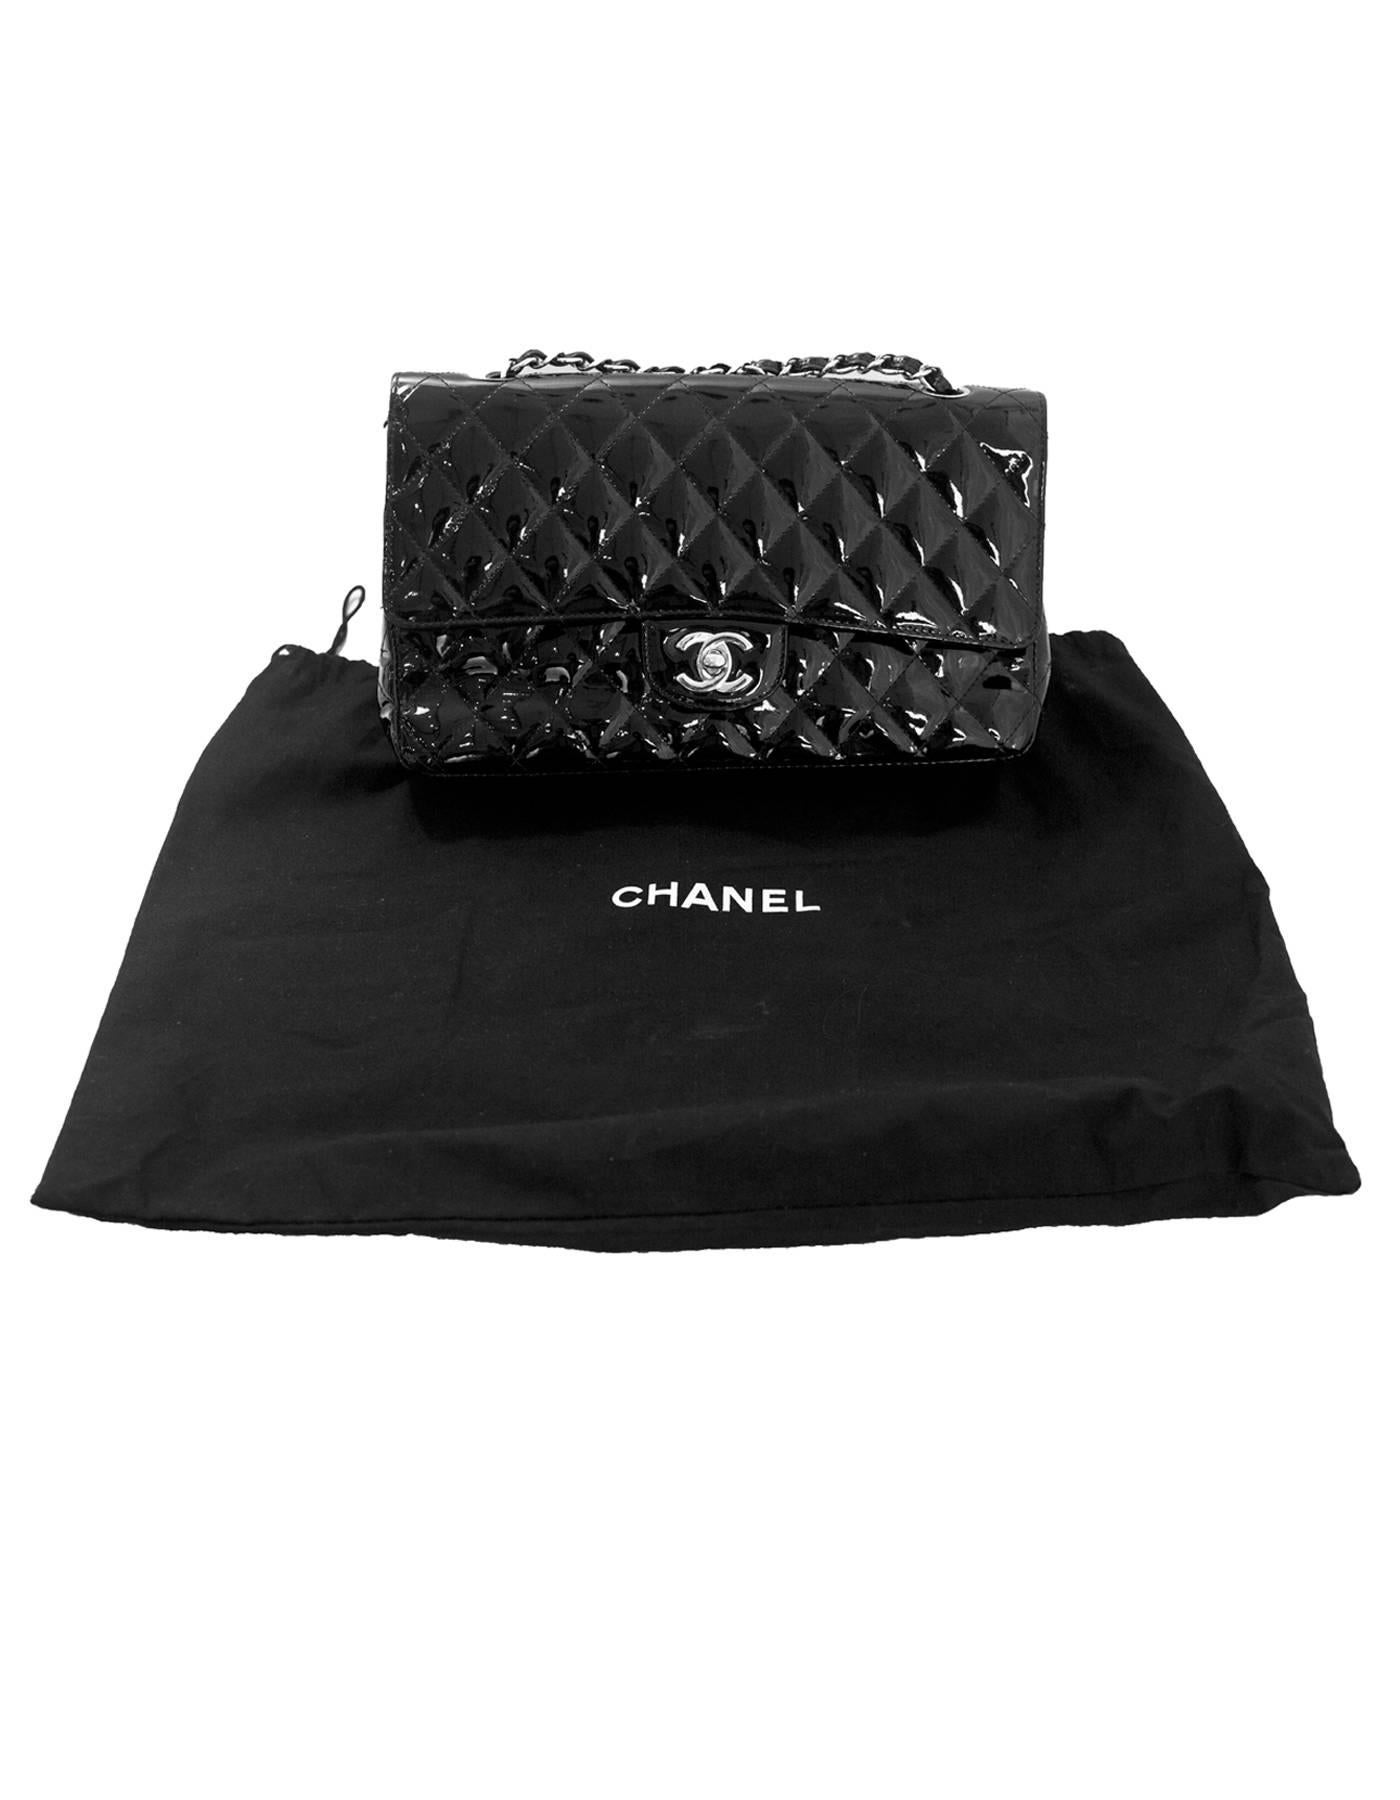 Chanel Black Patent Leather 10